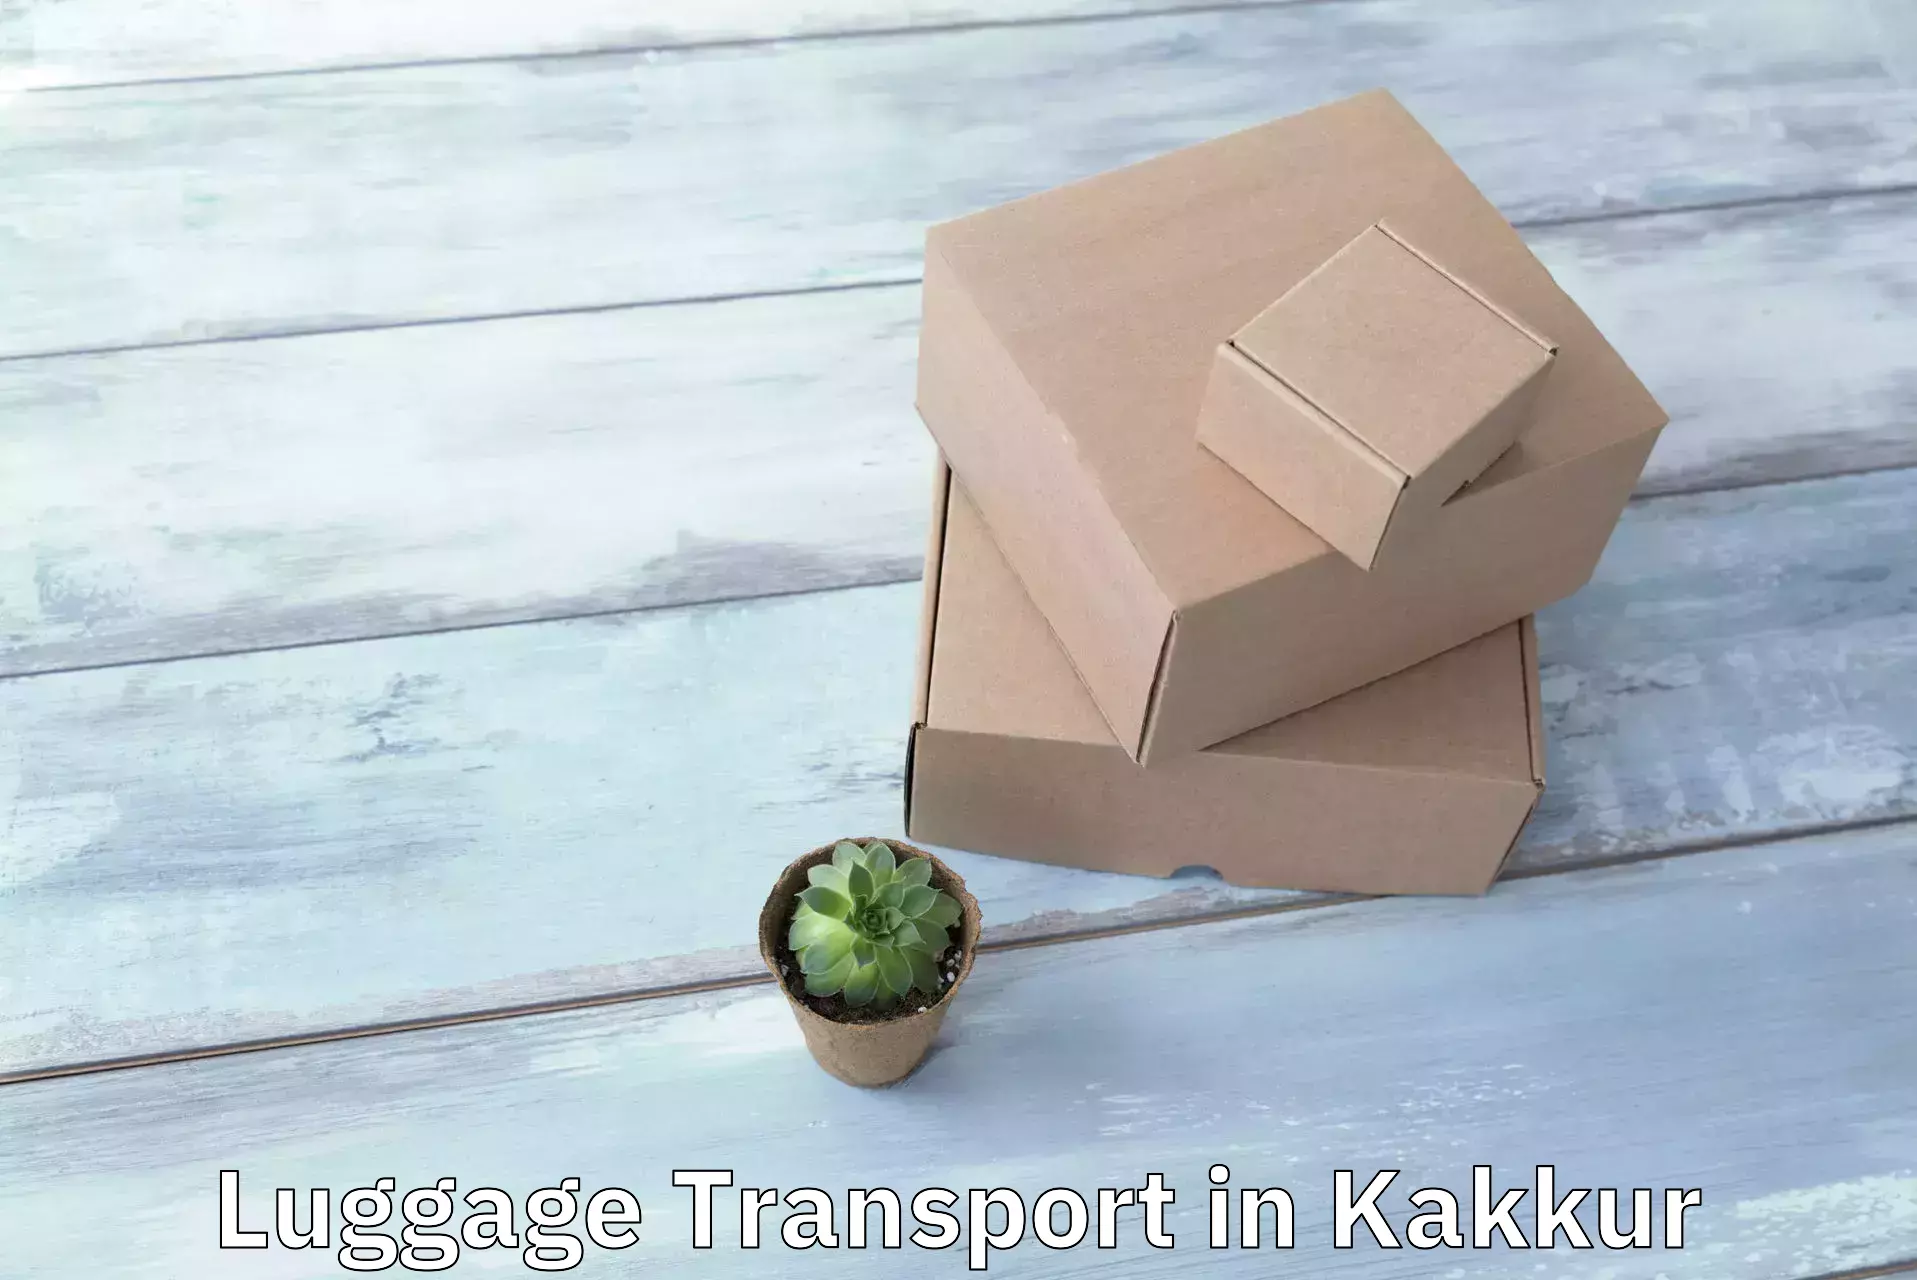 Luggage delivery optimization in Kakkur